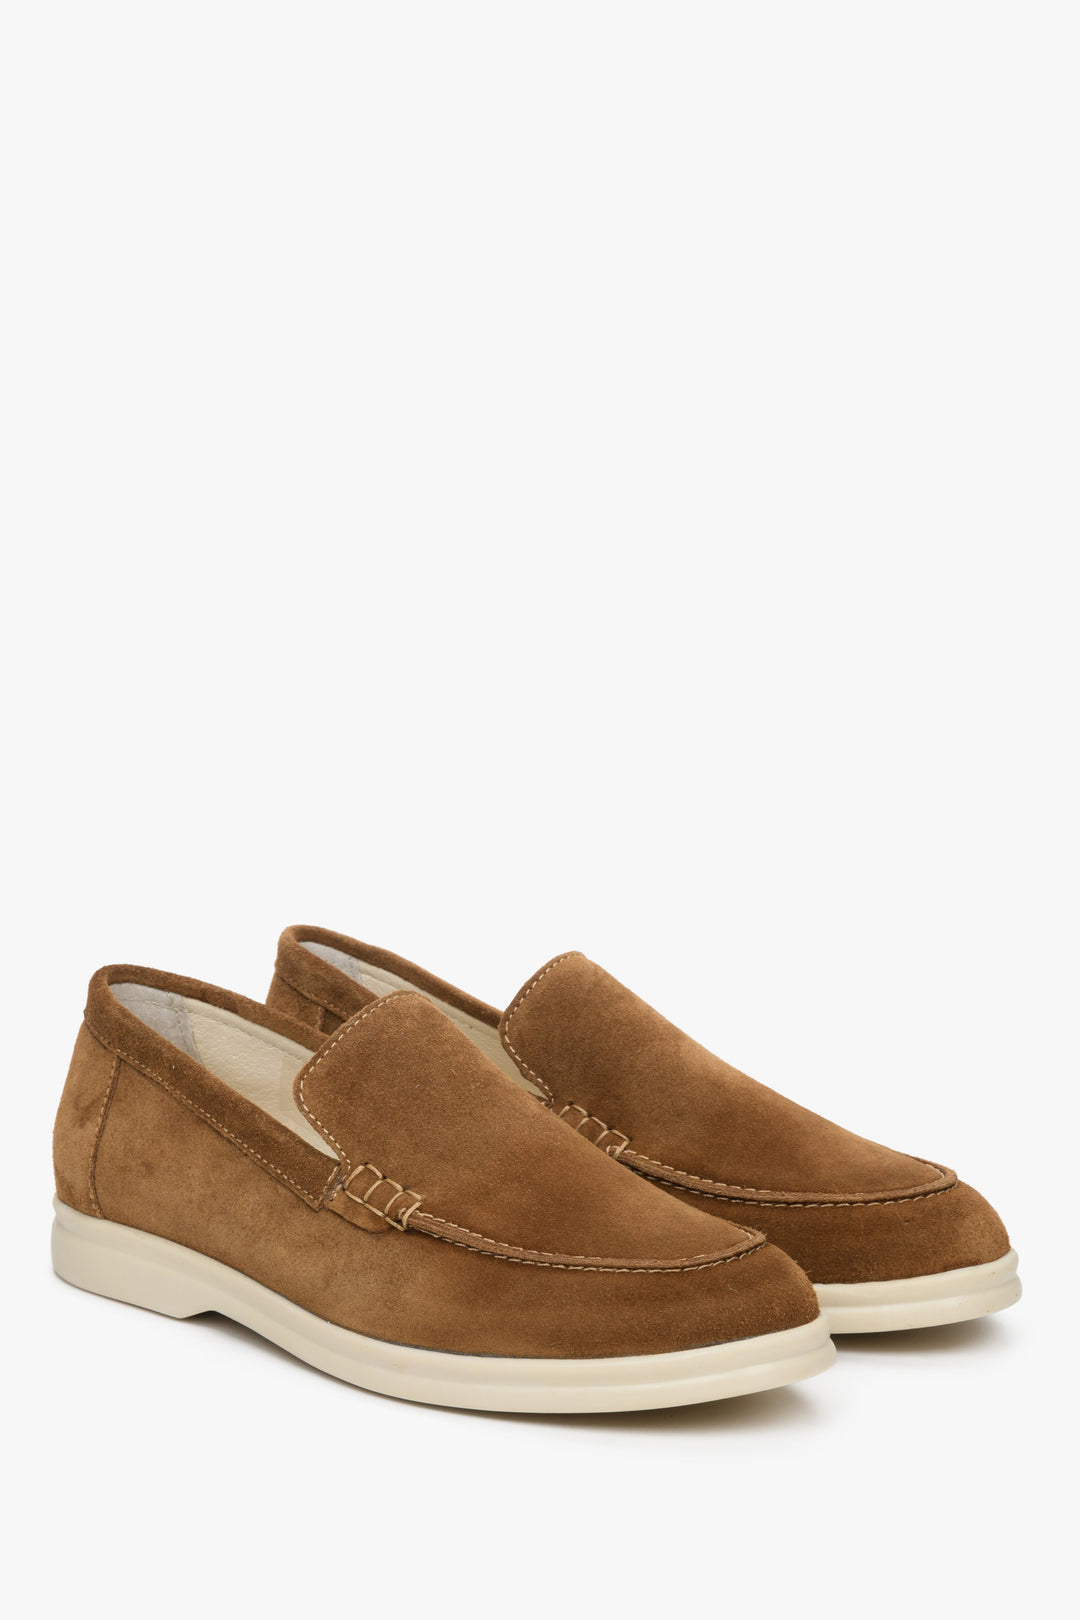 Women's suede loafers in brown by Estro - presentation of the sideline and white sole.